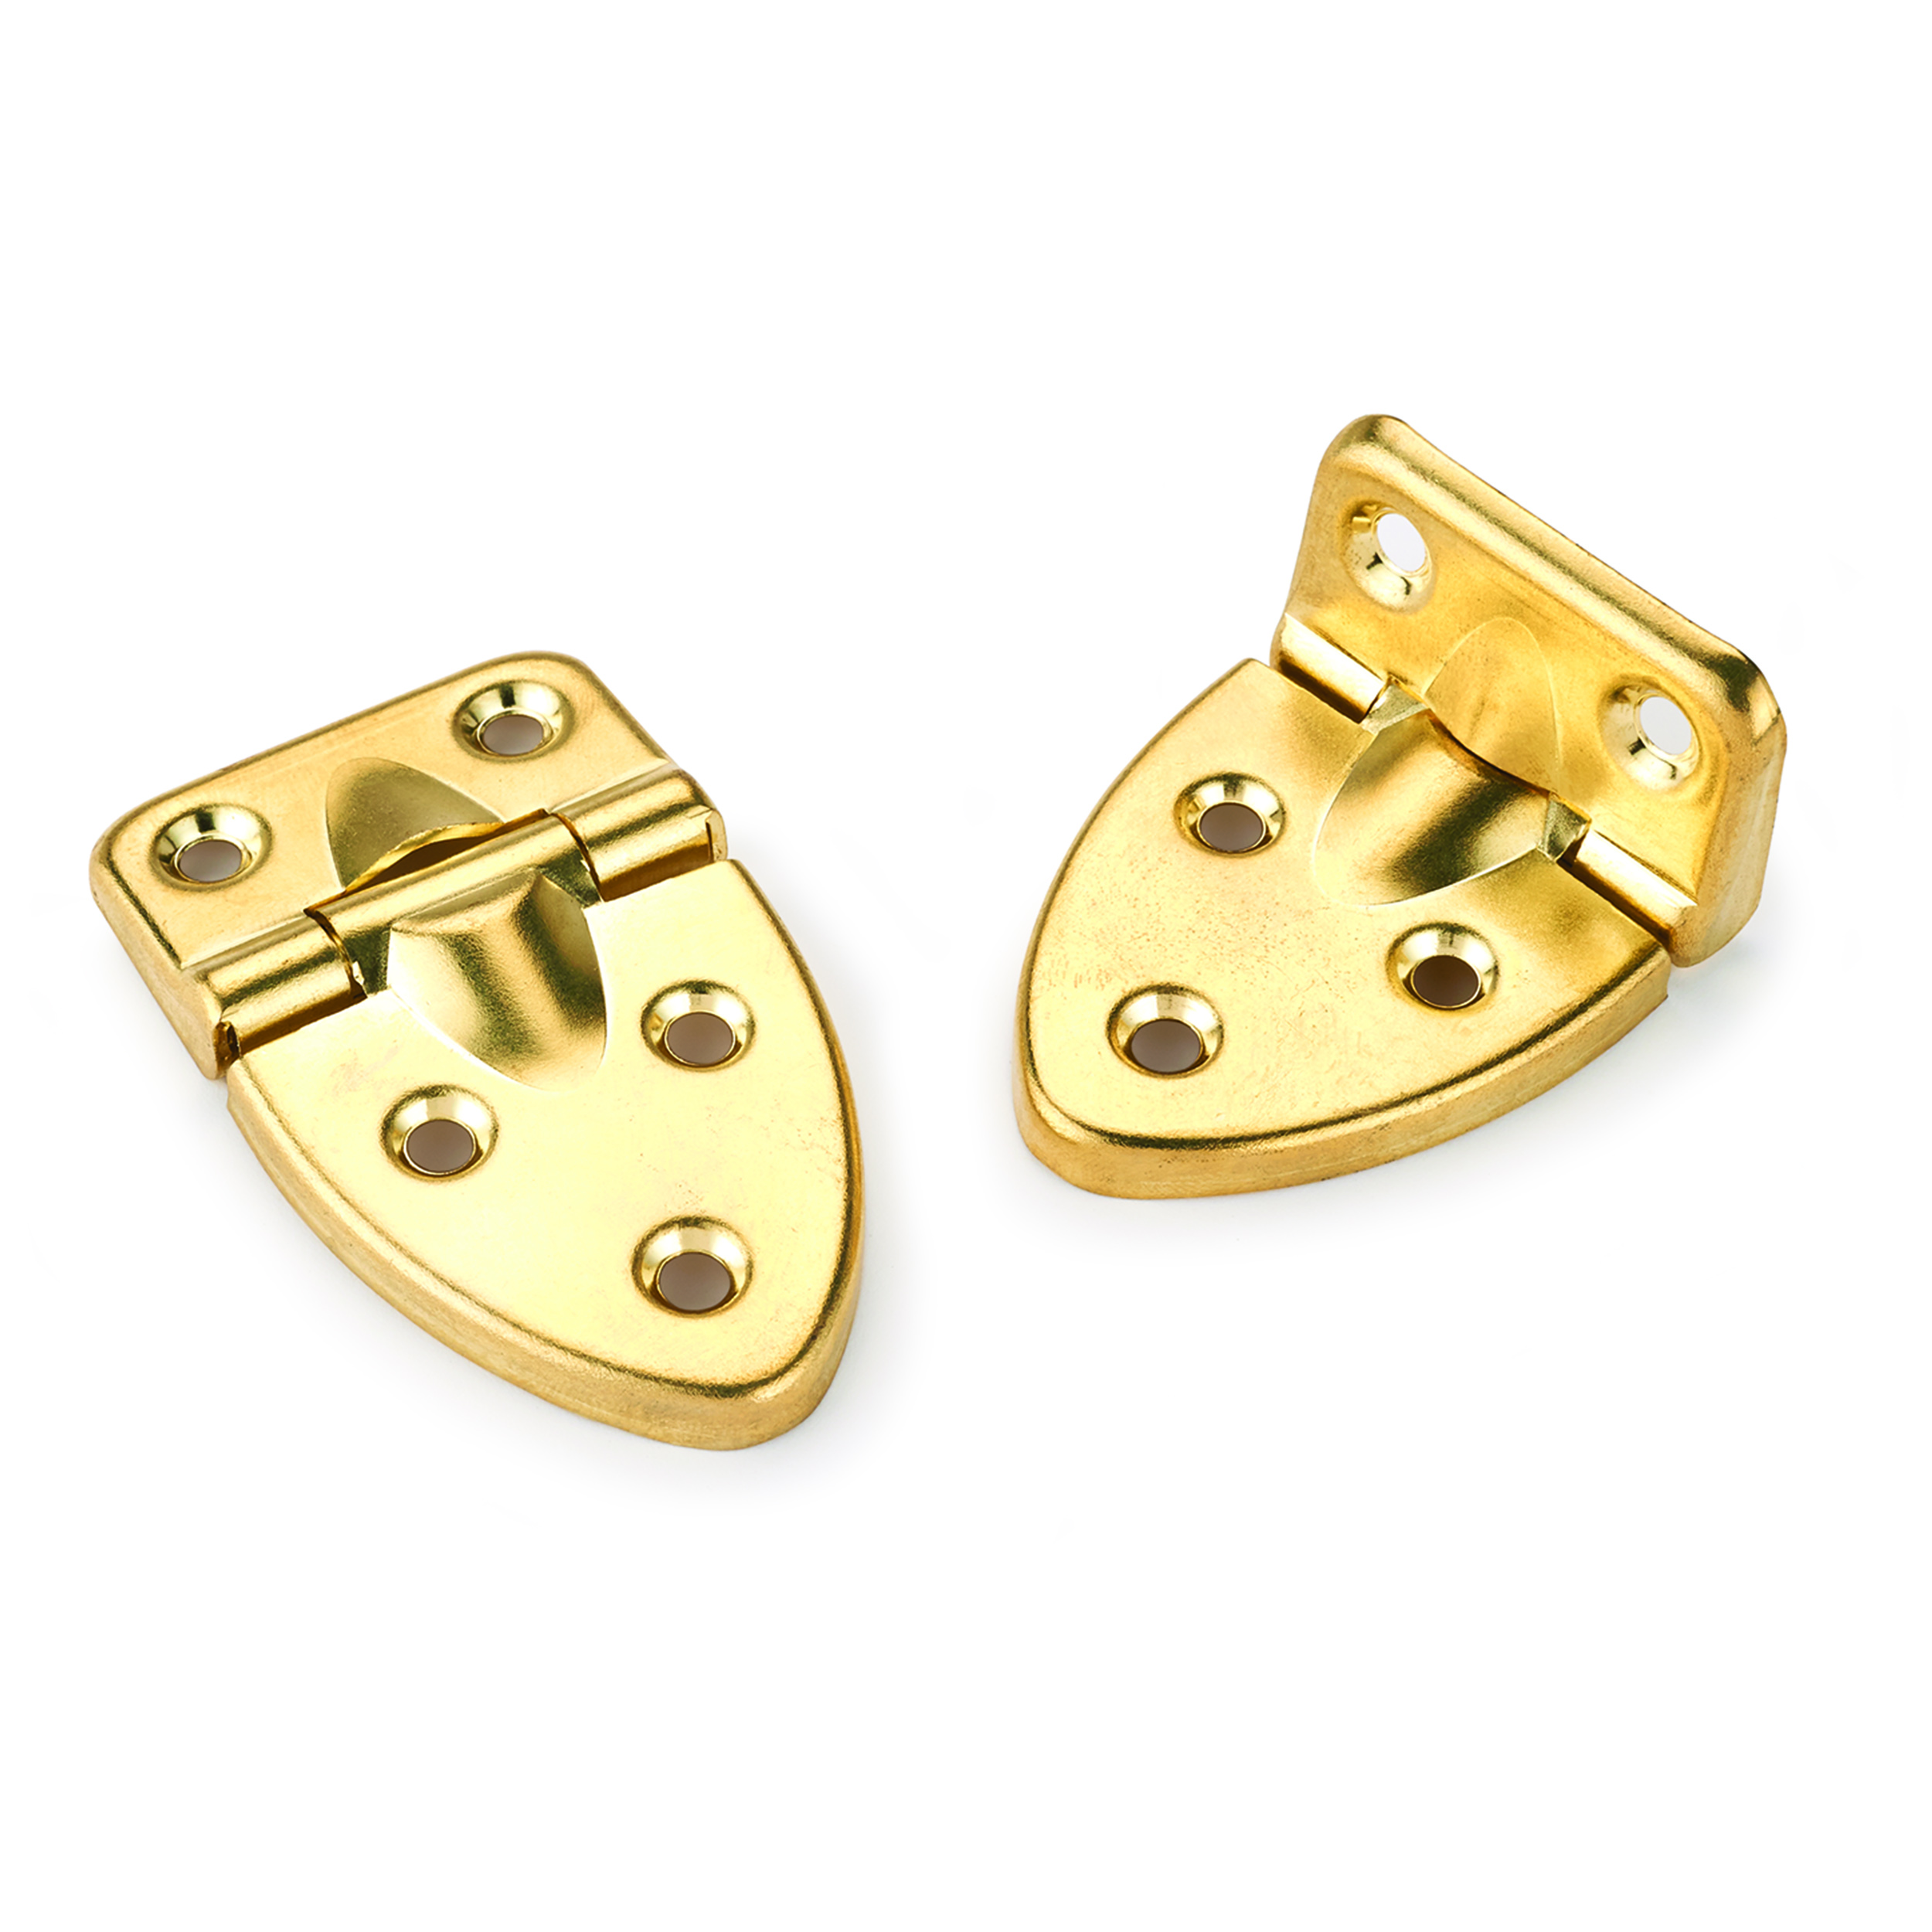 90 Degree Stop Hinge Brass Plated 2-19/32" X 1-17/32" Pair